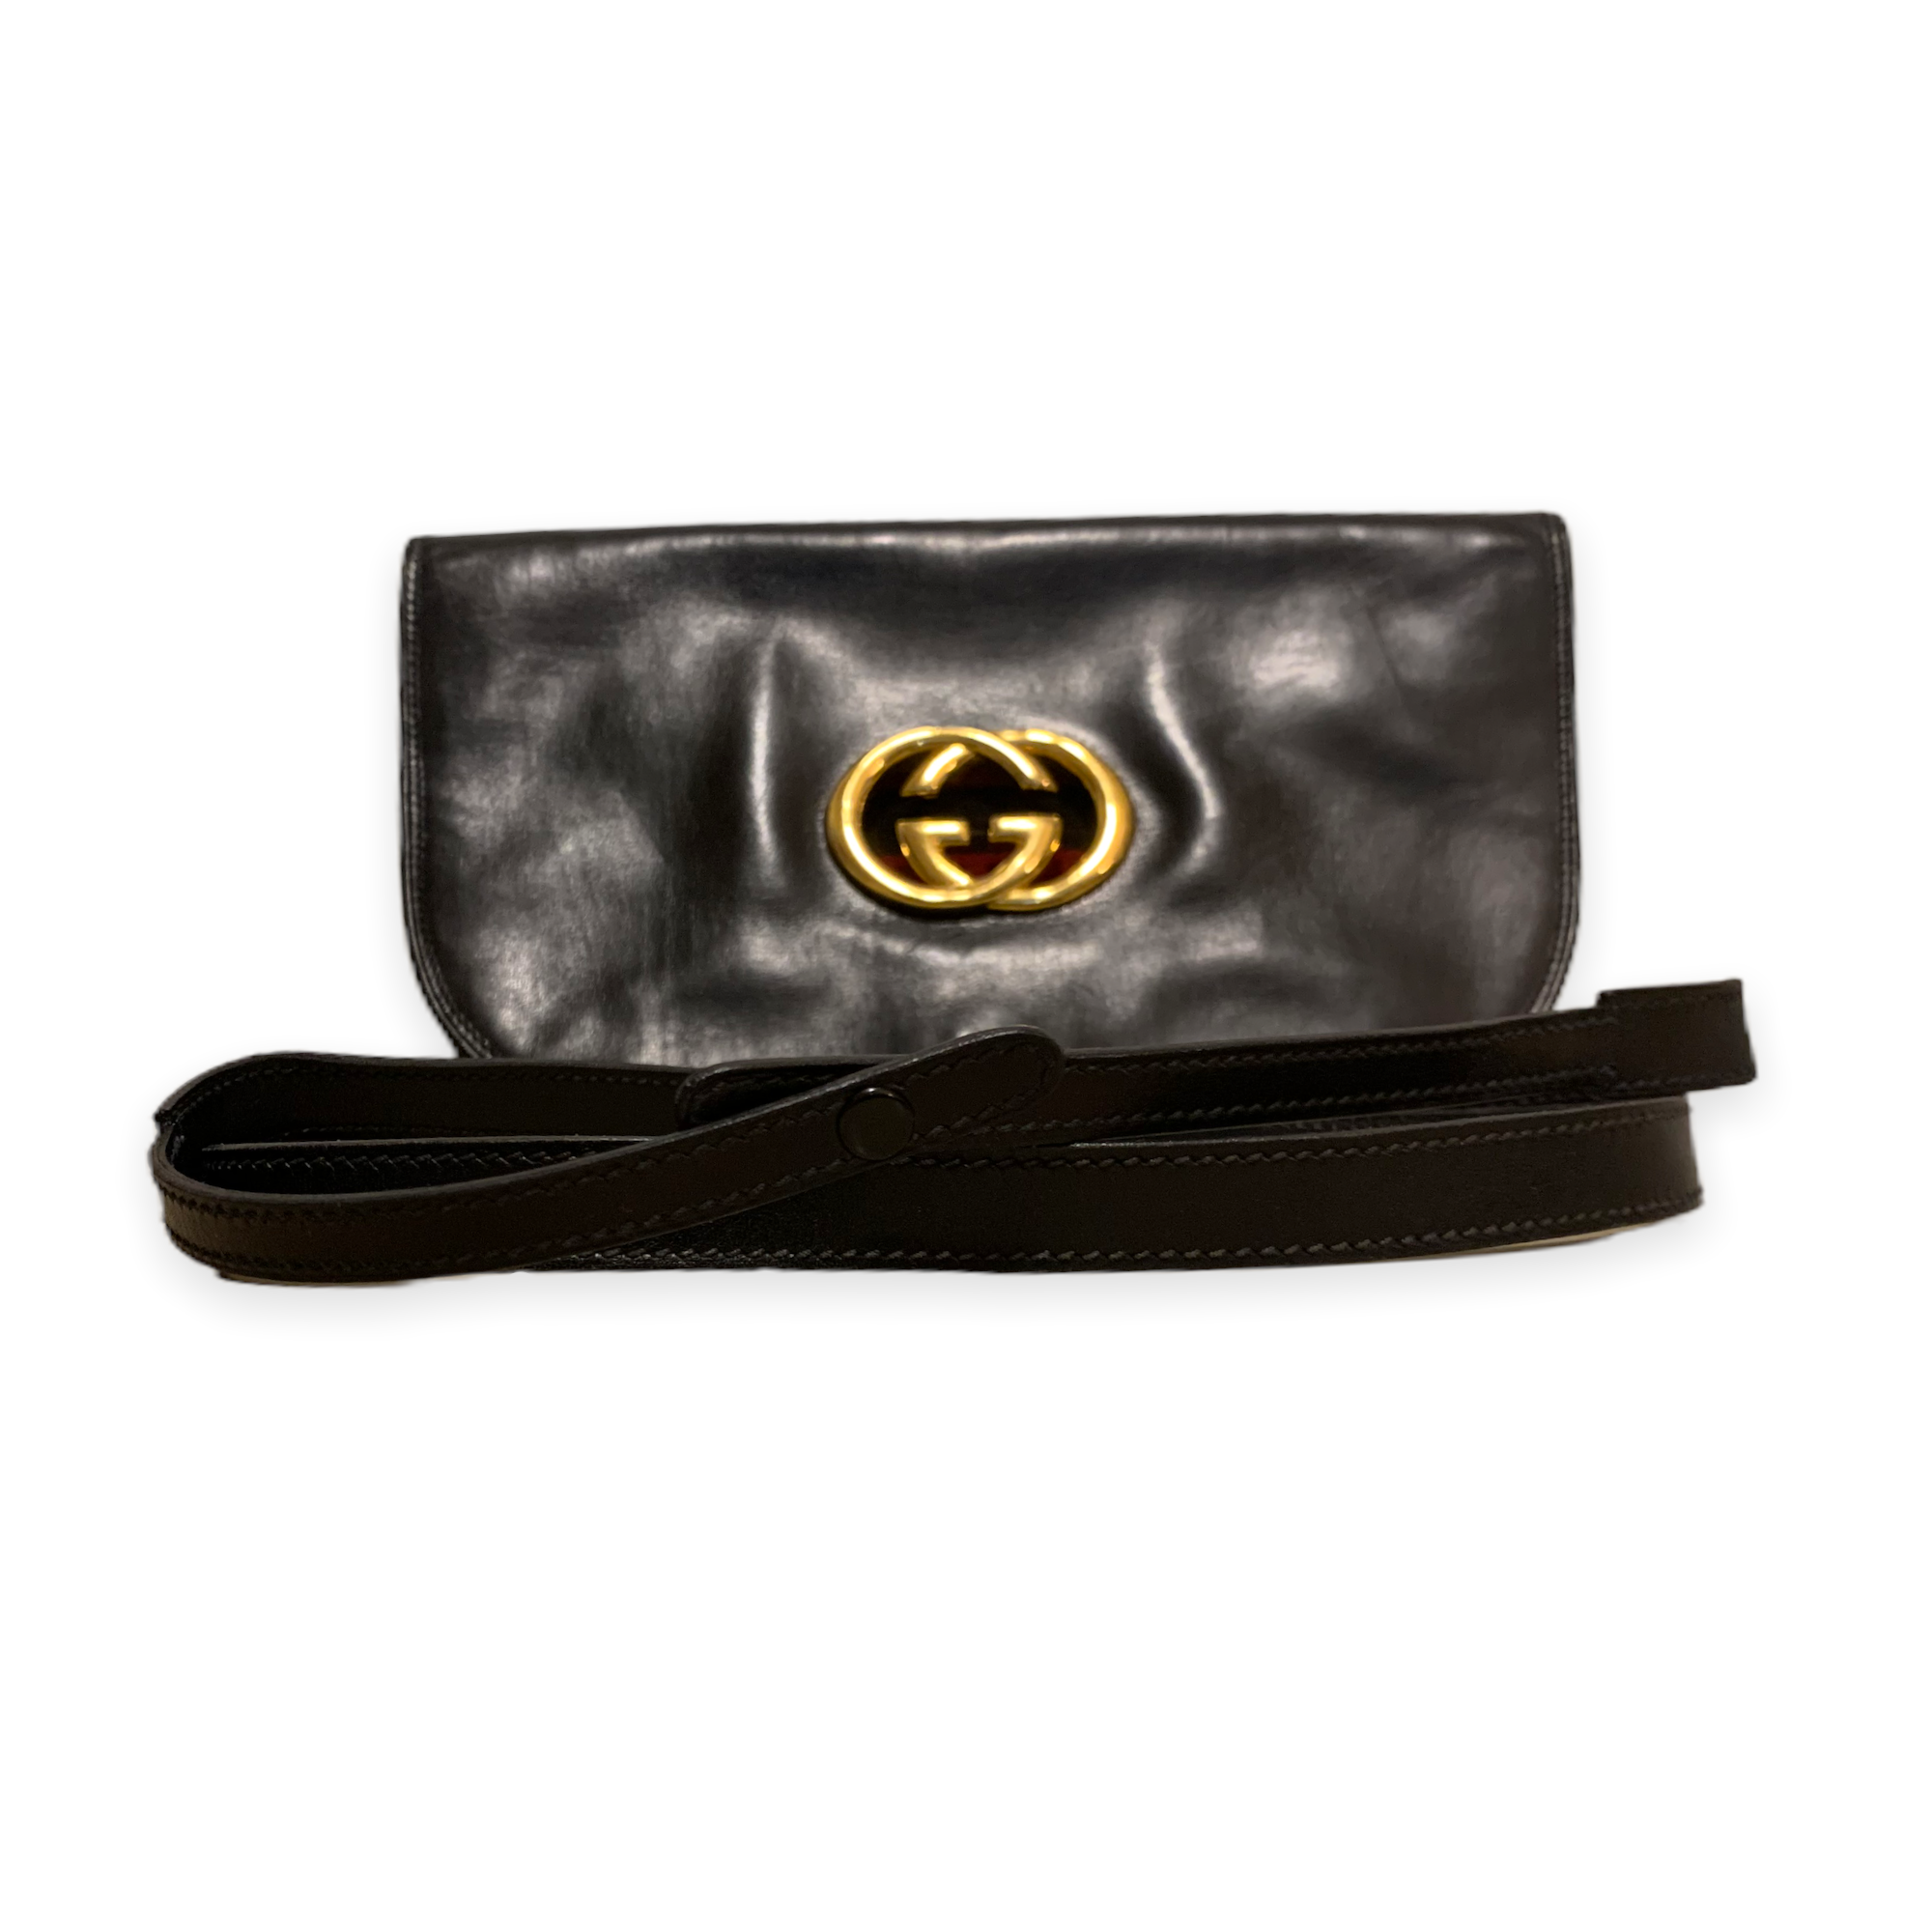 GUCCI Italy black leather blondie clutch-shoulder bag circa 1970’s